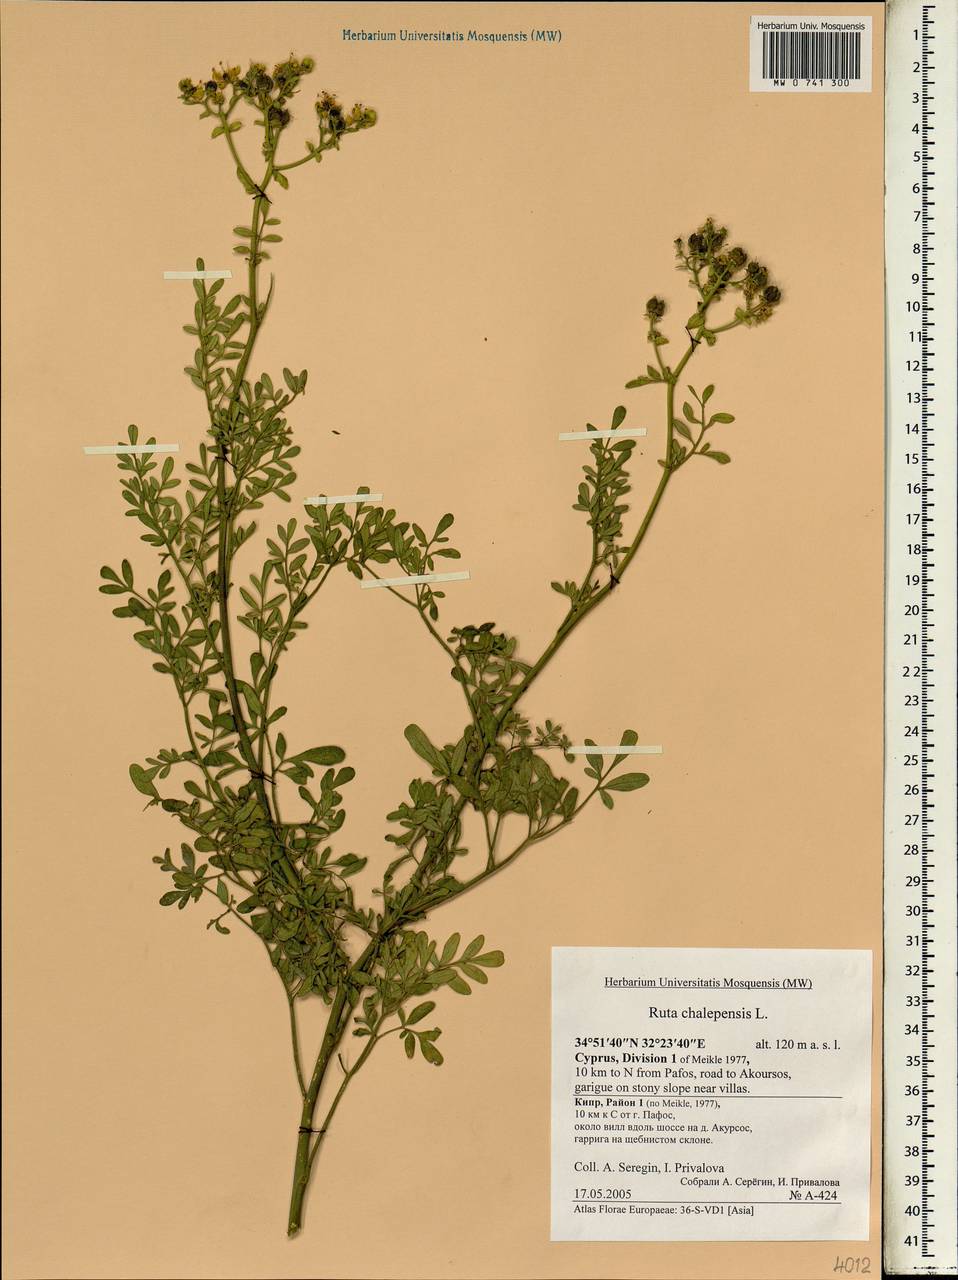 Ruta chalepensis L., South Asia, South Asia (Asia outside ex-Soviet states and Mongolia) (ASIA) (Cyprus)